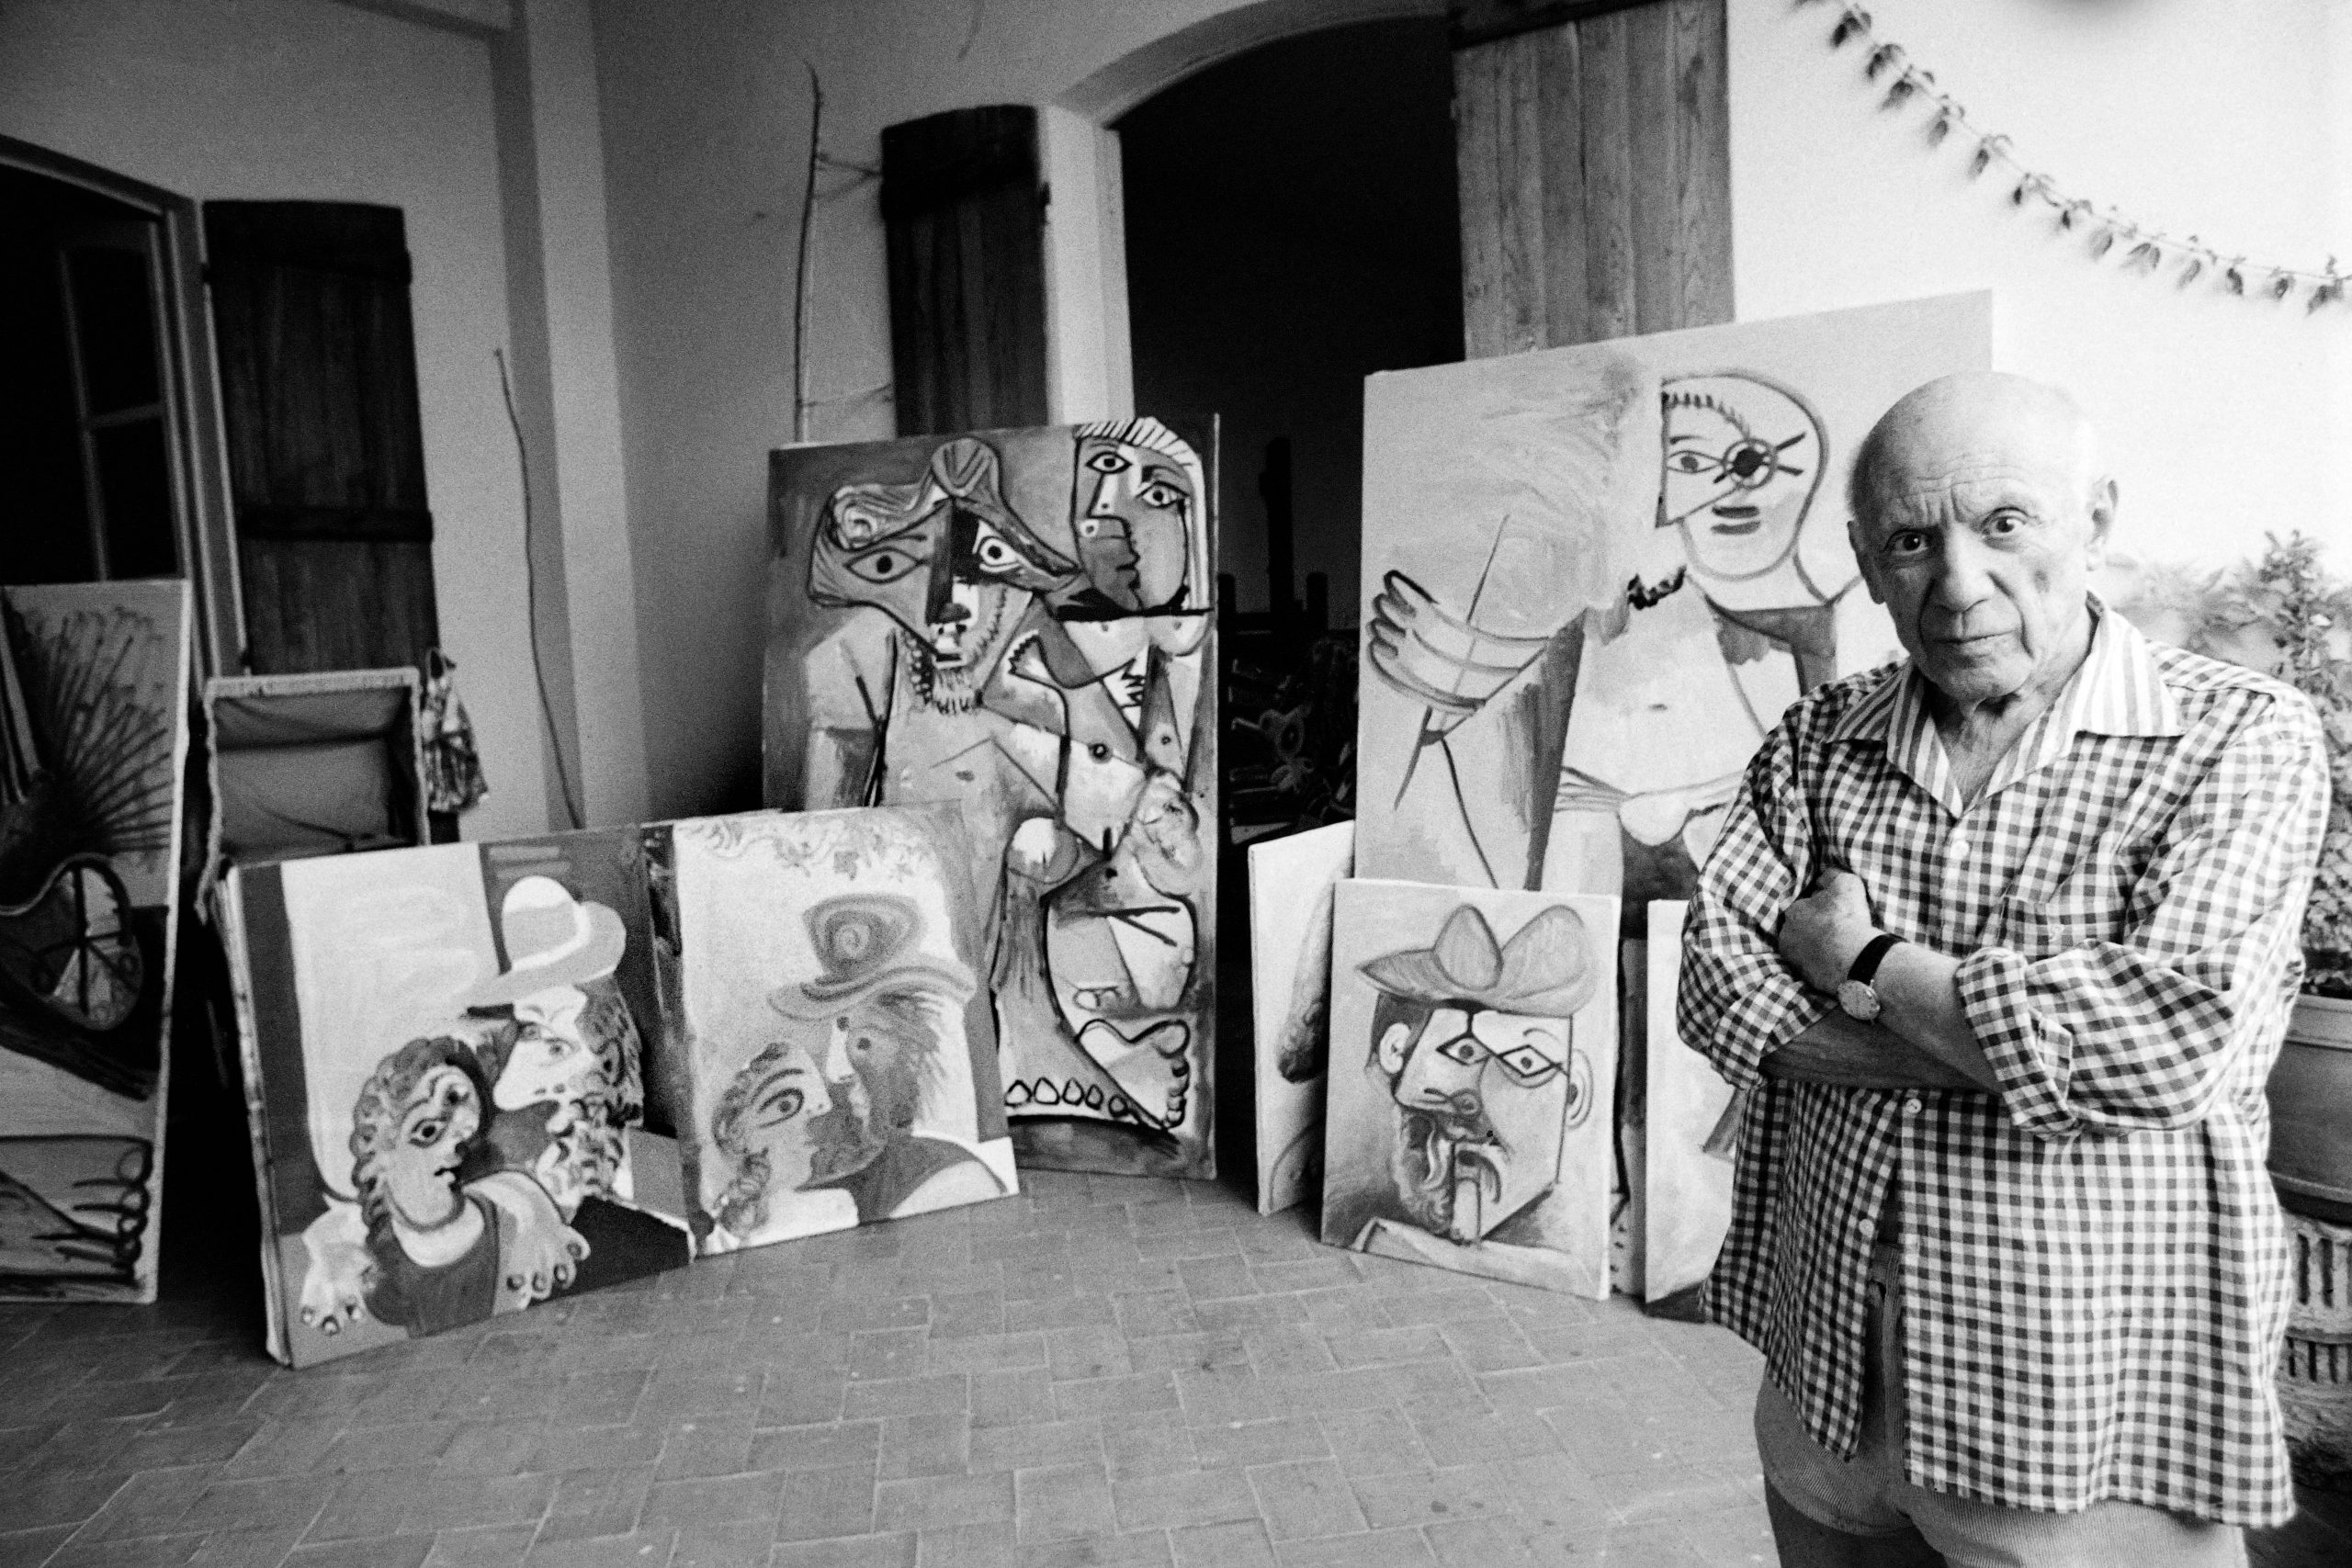 Want to Dip a Toe Into the Blazing Market for Picasso? We Polled the  Experts About Where the Smart Buys Are